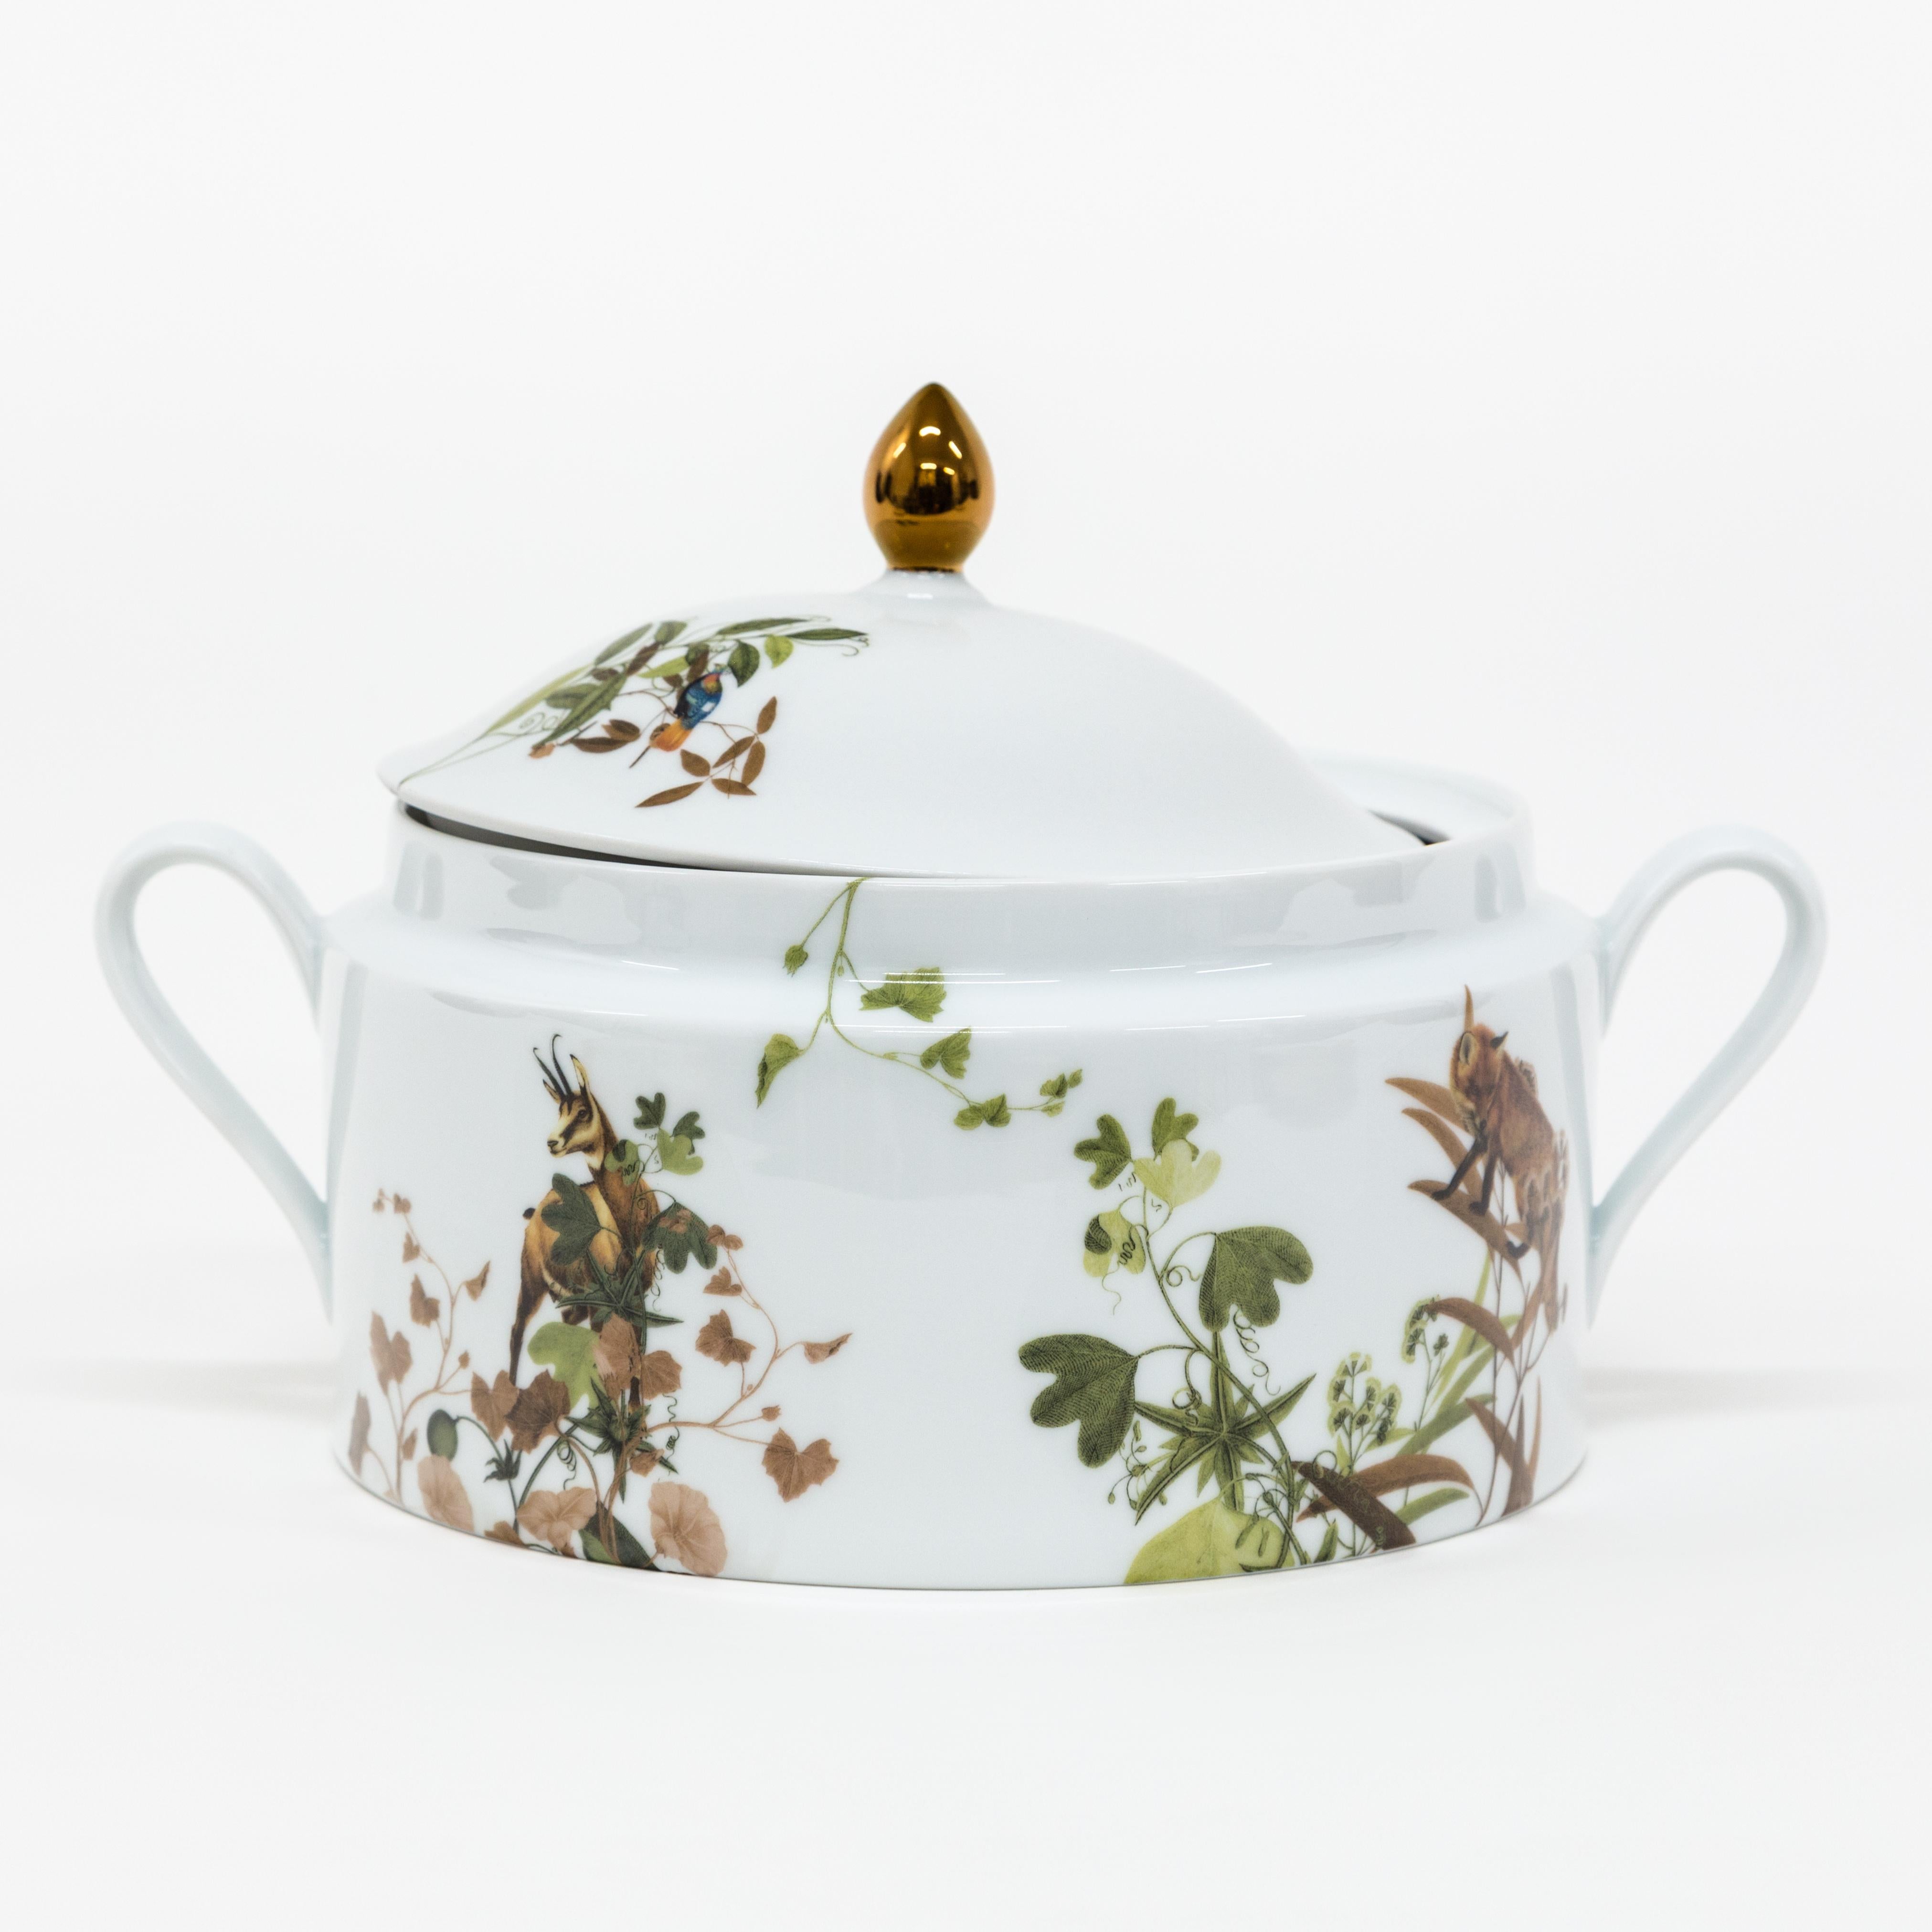 This soup tureen is a Grand Tour piece by Vito Nesta that is part of the Mont Blanc porcelain collection, Inspired by the highest mountain of the Alps, the Mont Blanc, this collection is a photography of the changing seasons. Winter is here and all